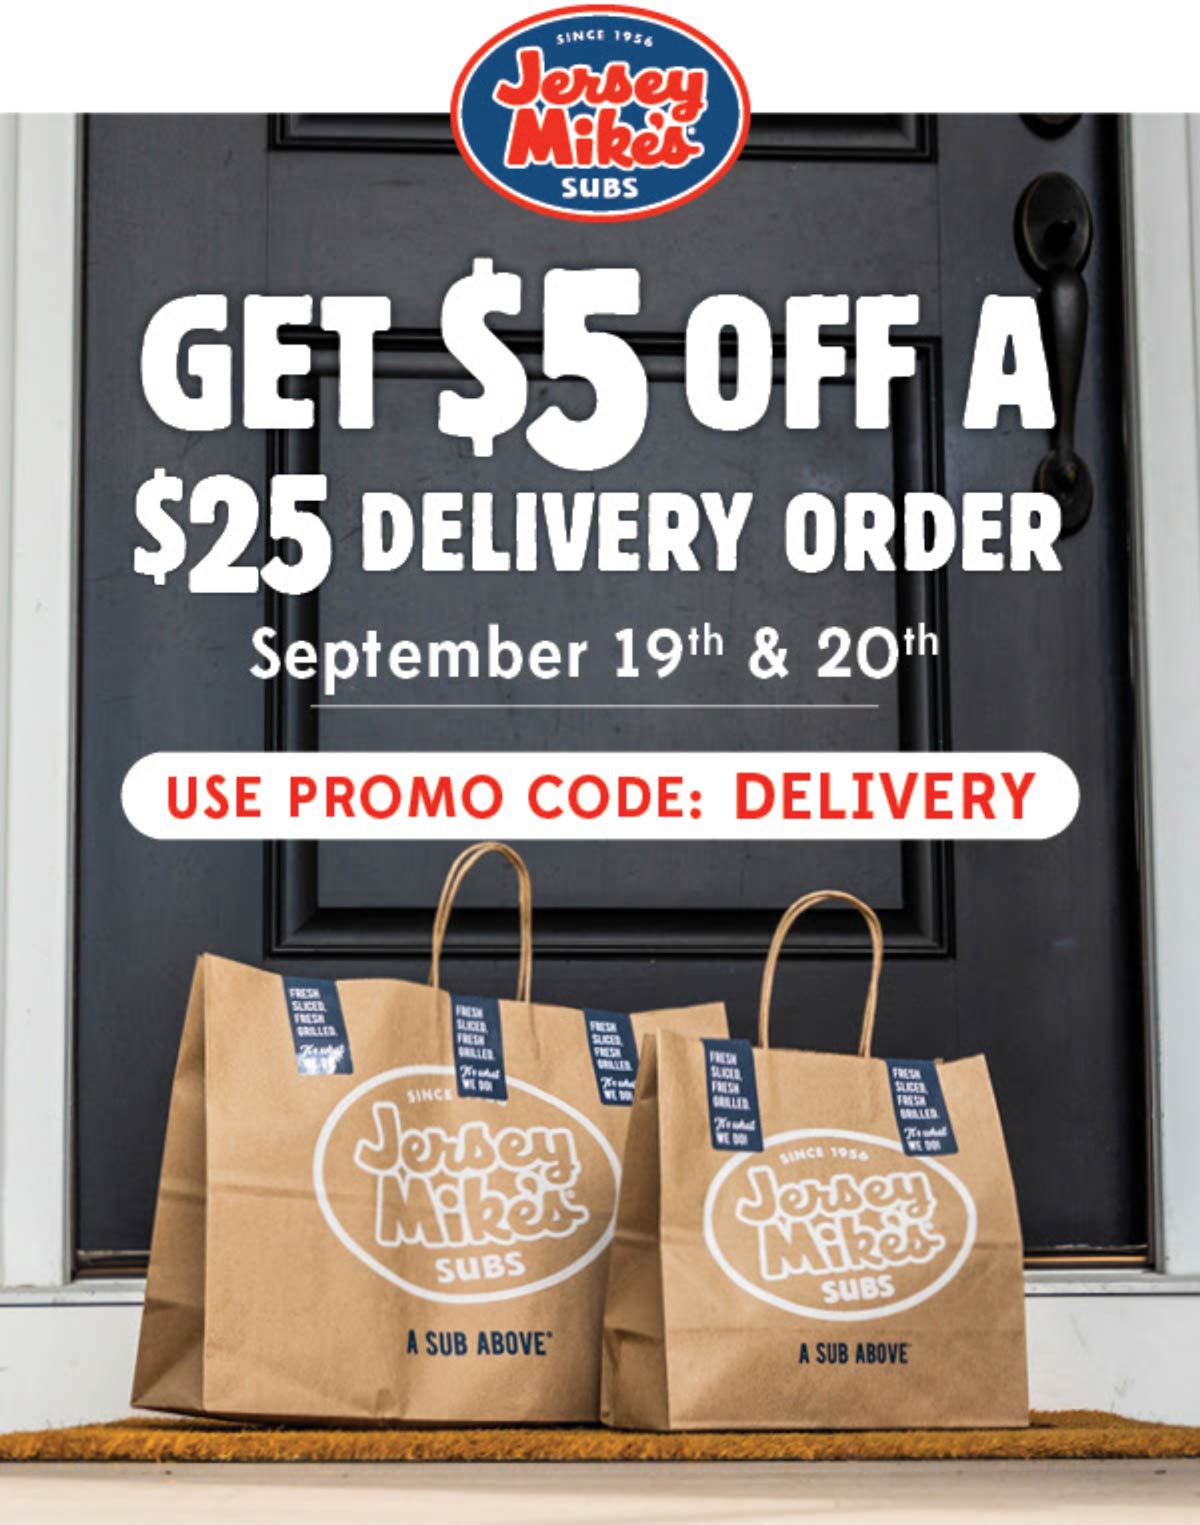 Jersey Mikes restaurants Coupon  $5 off $25 delivery today at Jersey Mikes subs restaurant via promo code DELIVERY #jerseymikes 